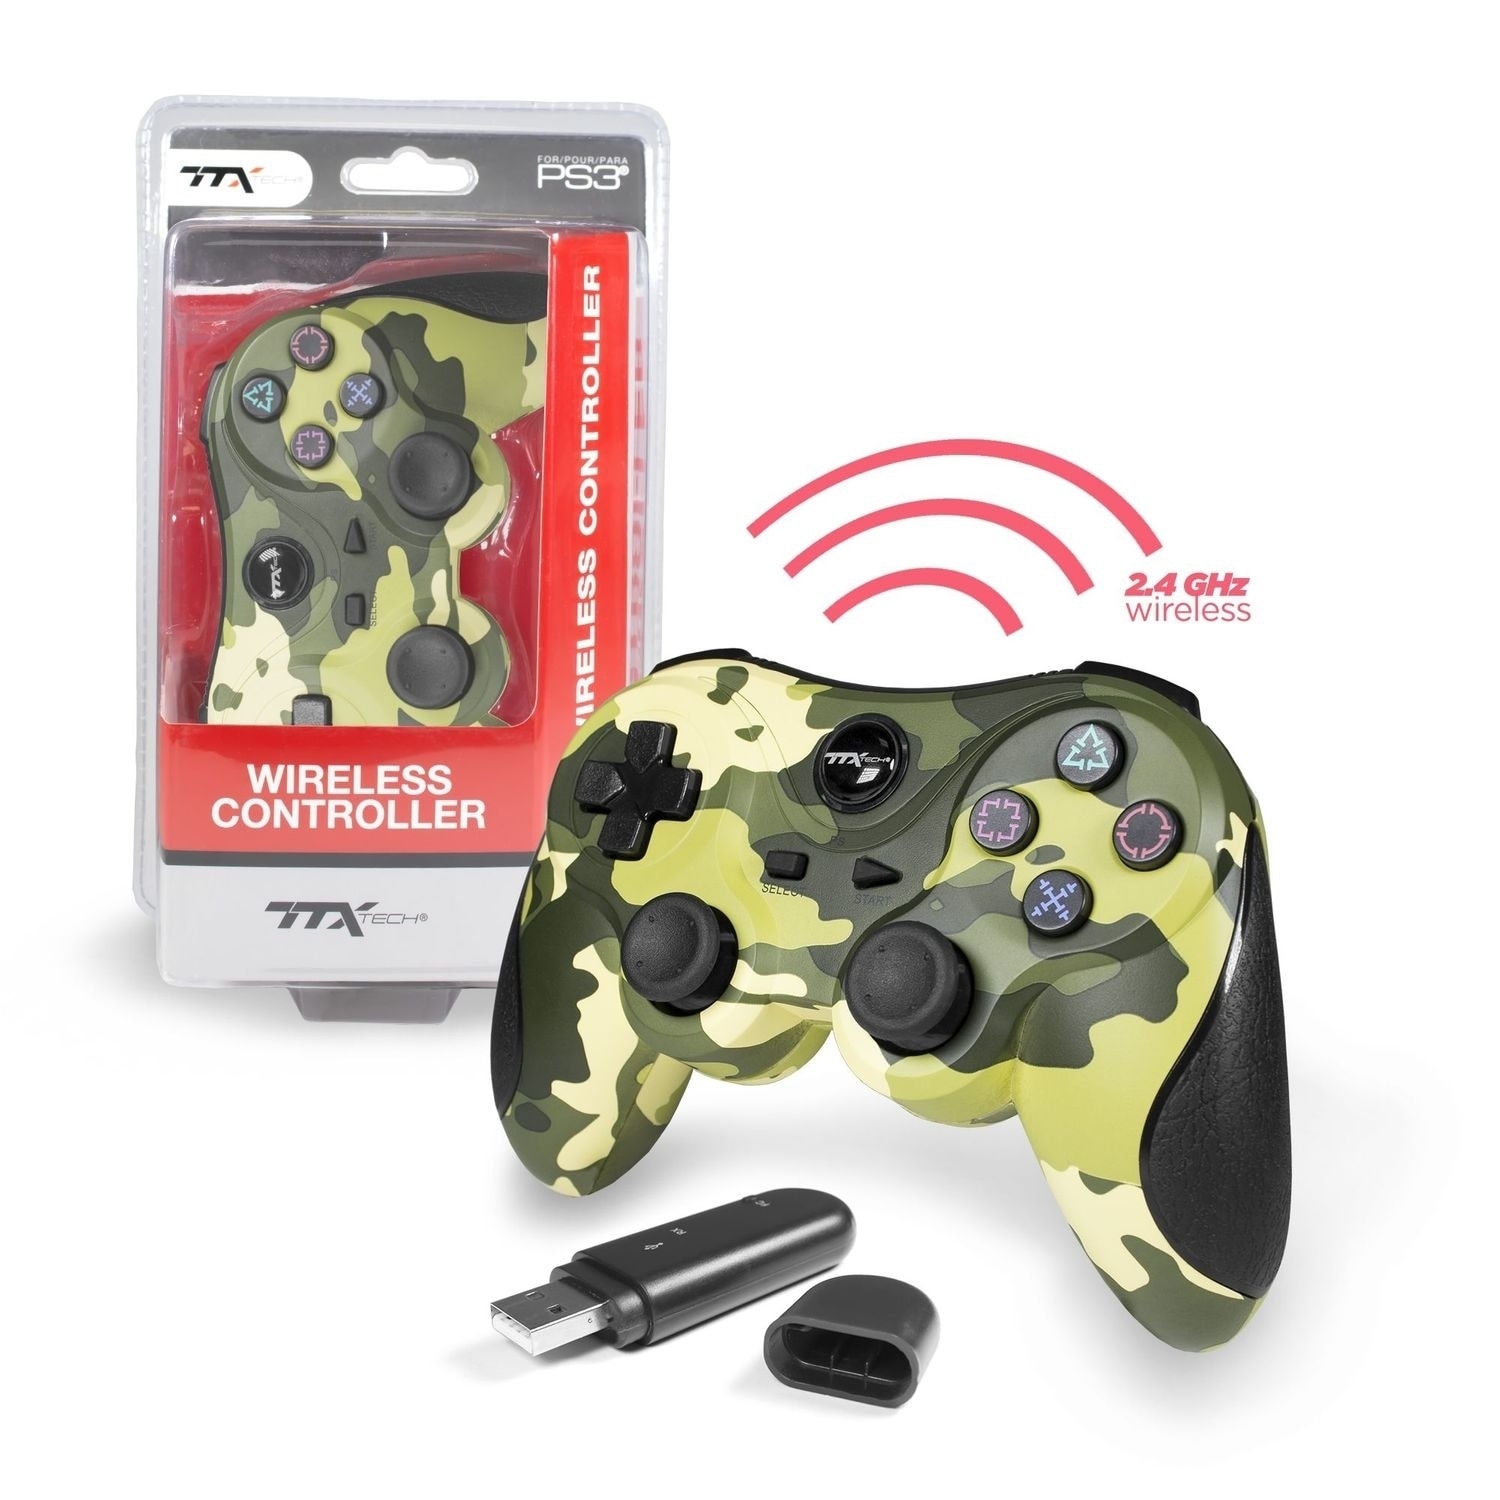 gamepad for ps3